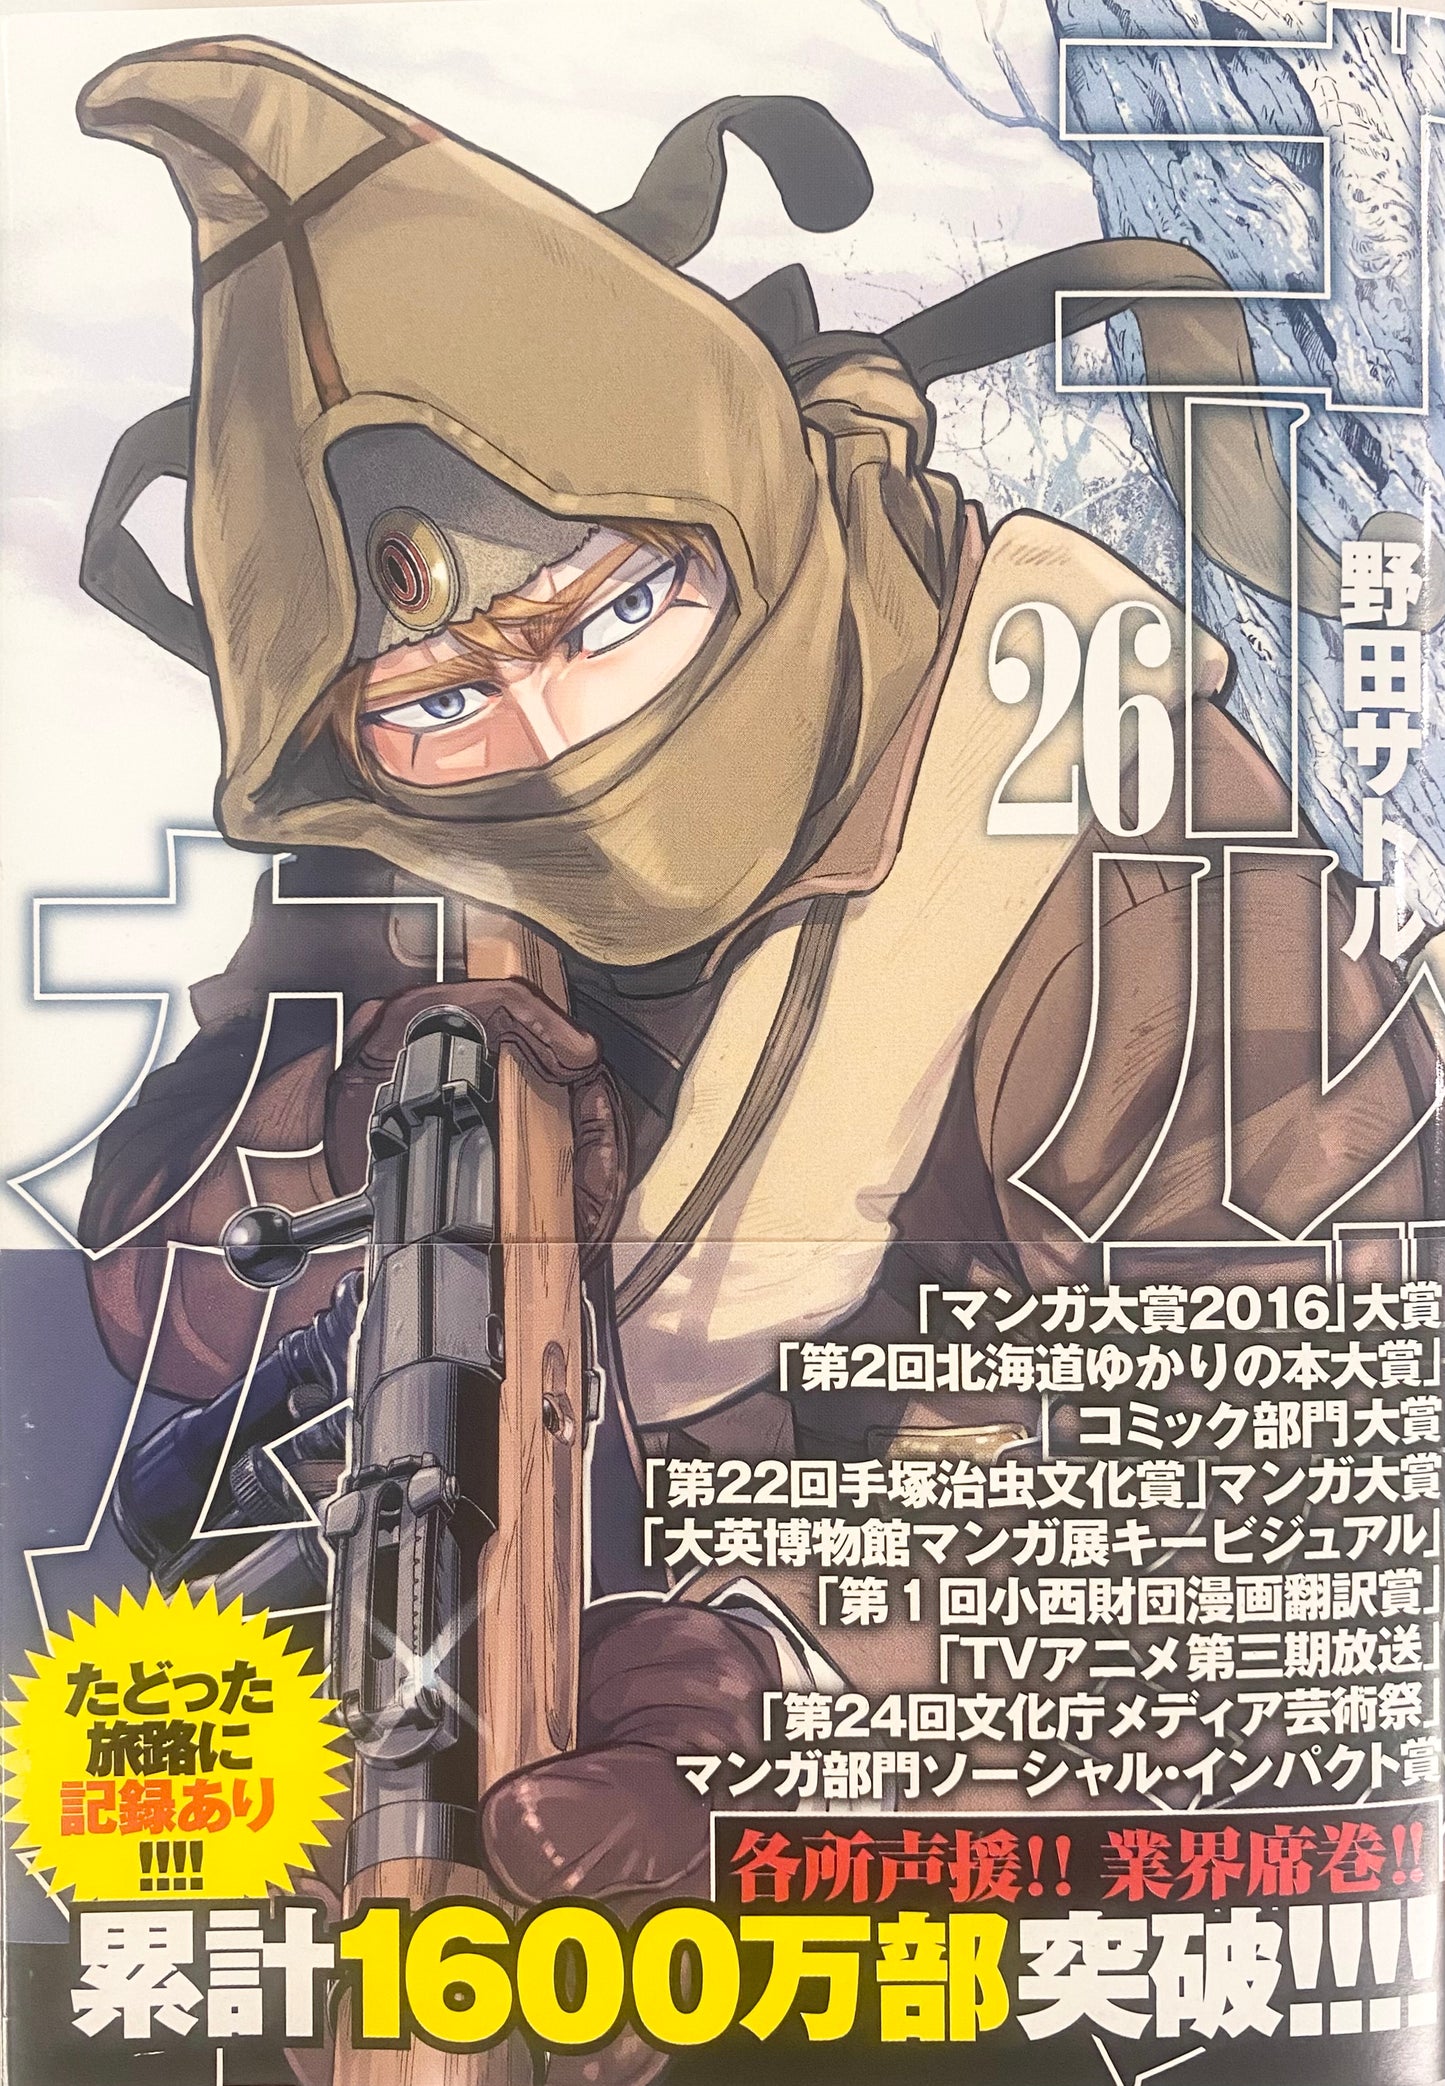 Golden Kamuy Vol.26-Official Japanese Edition